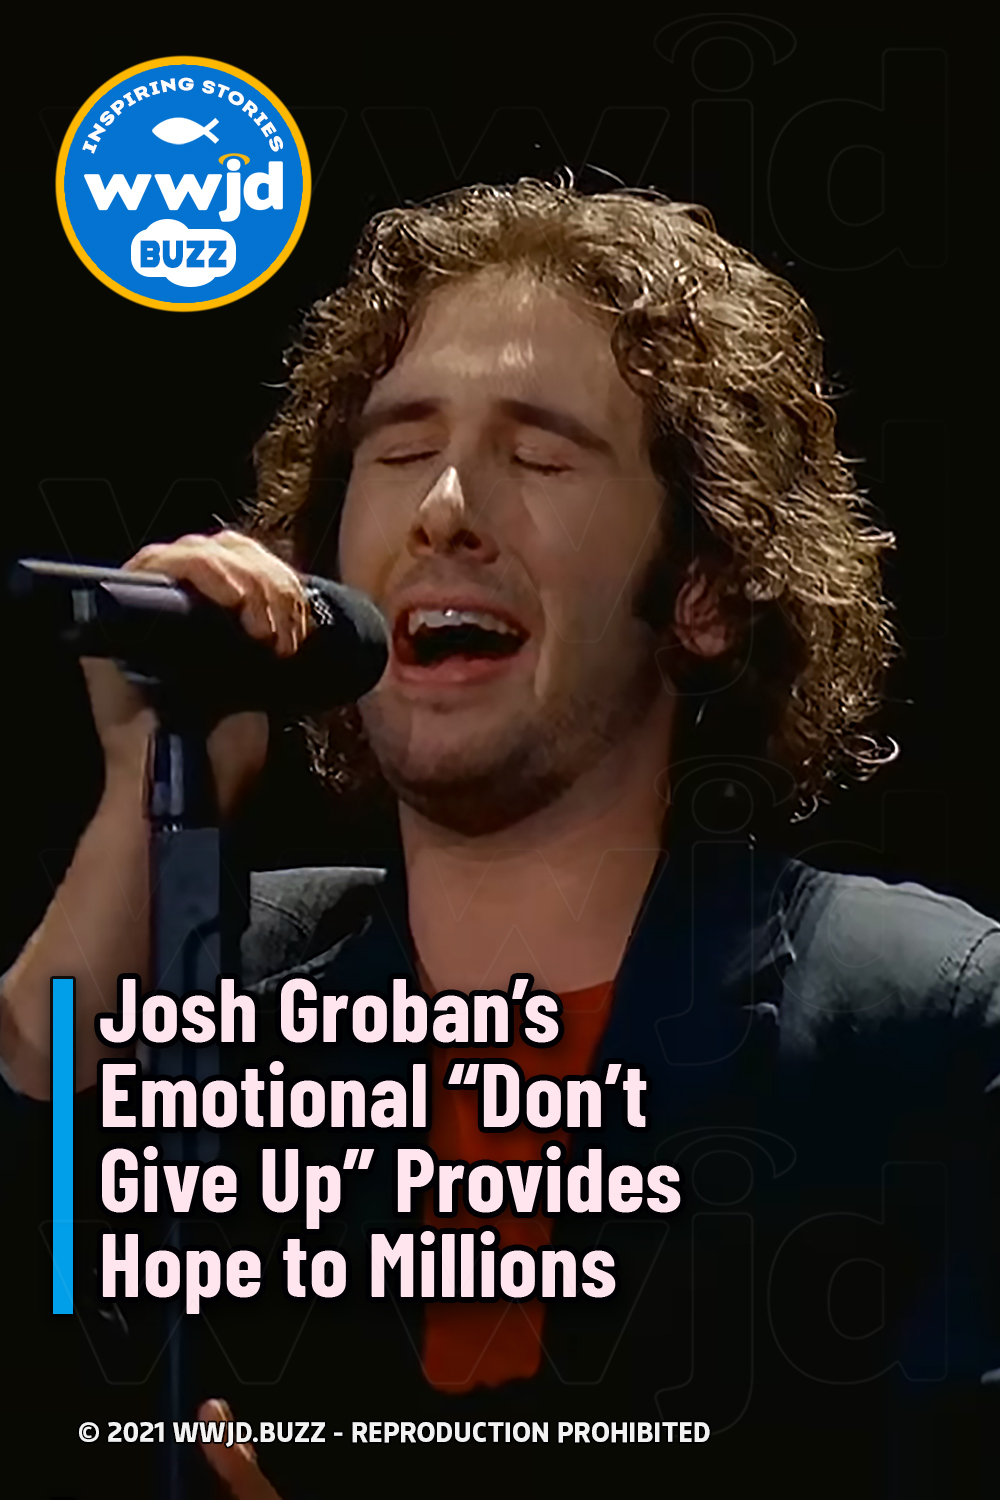 Josh Groban’s Emotional “Don’t Give Up” Provides Hope to Millions